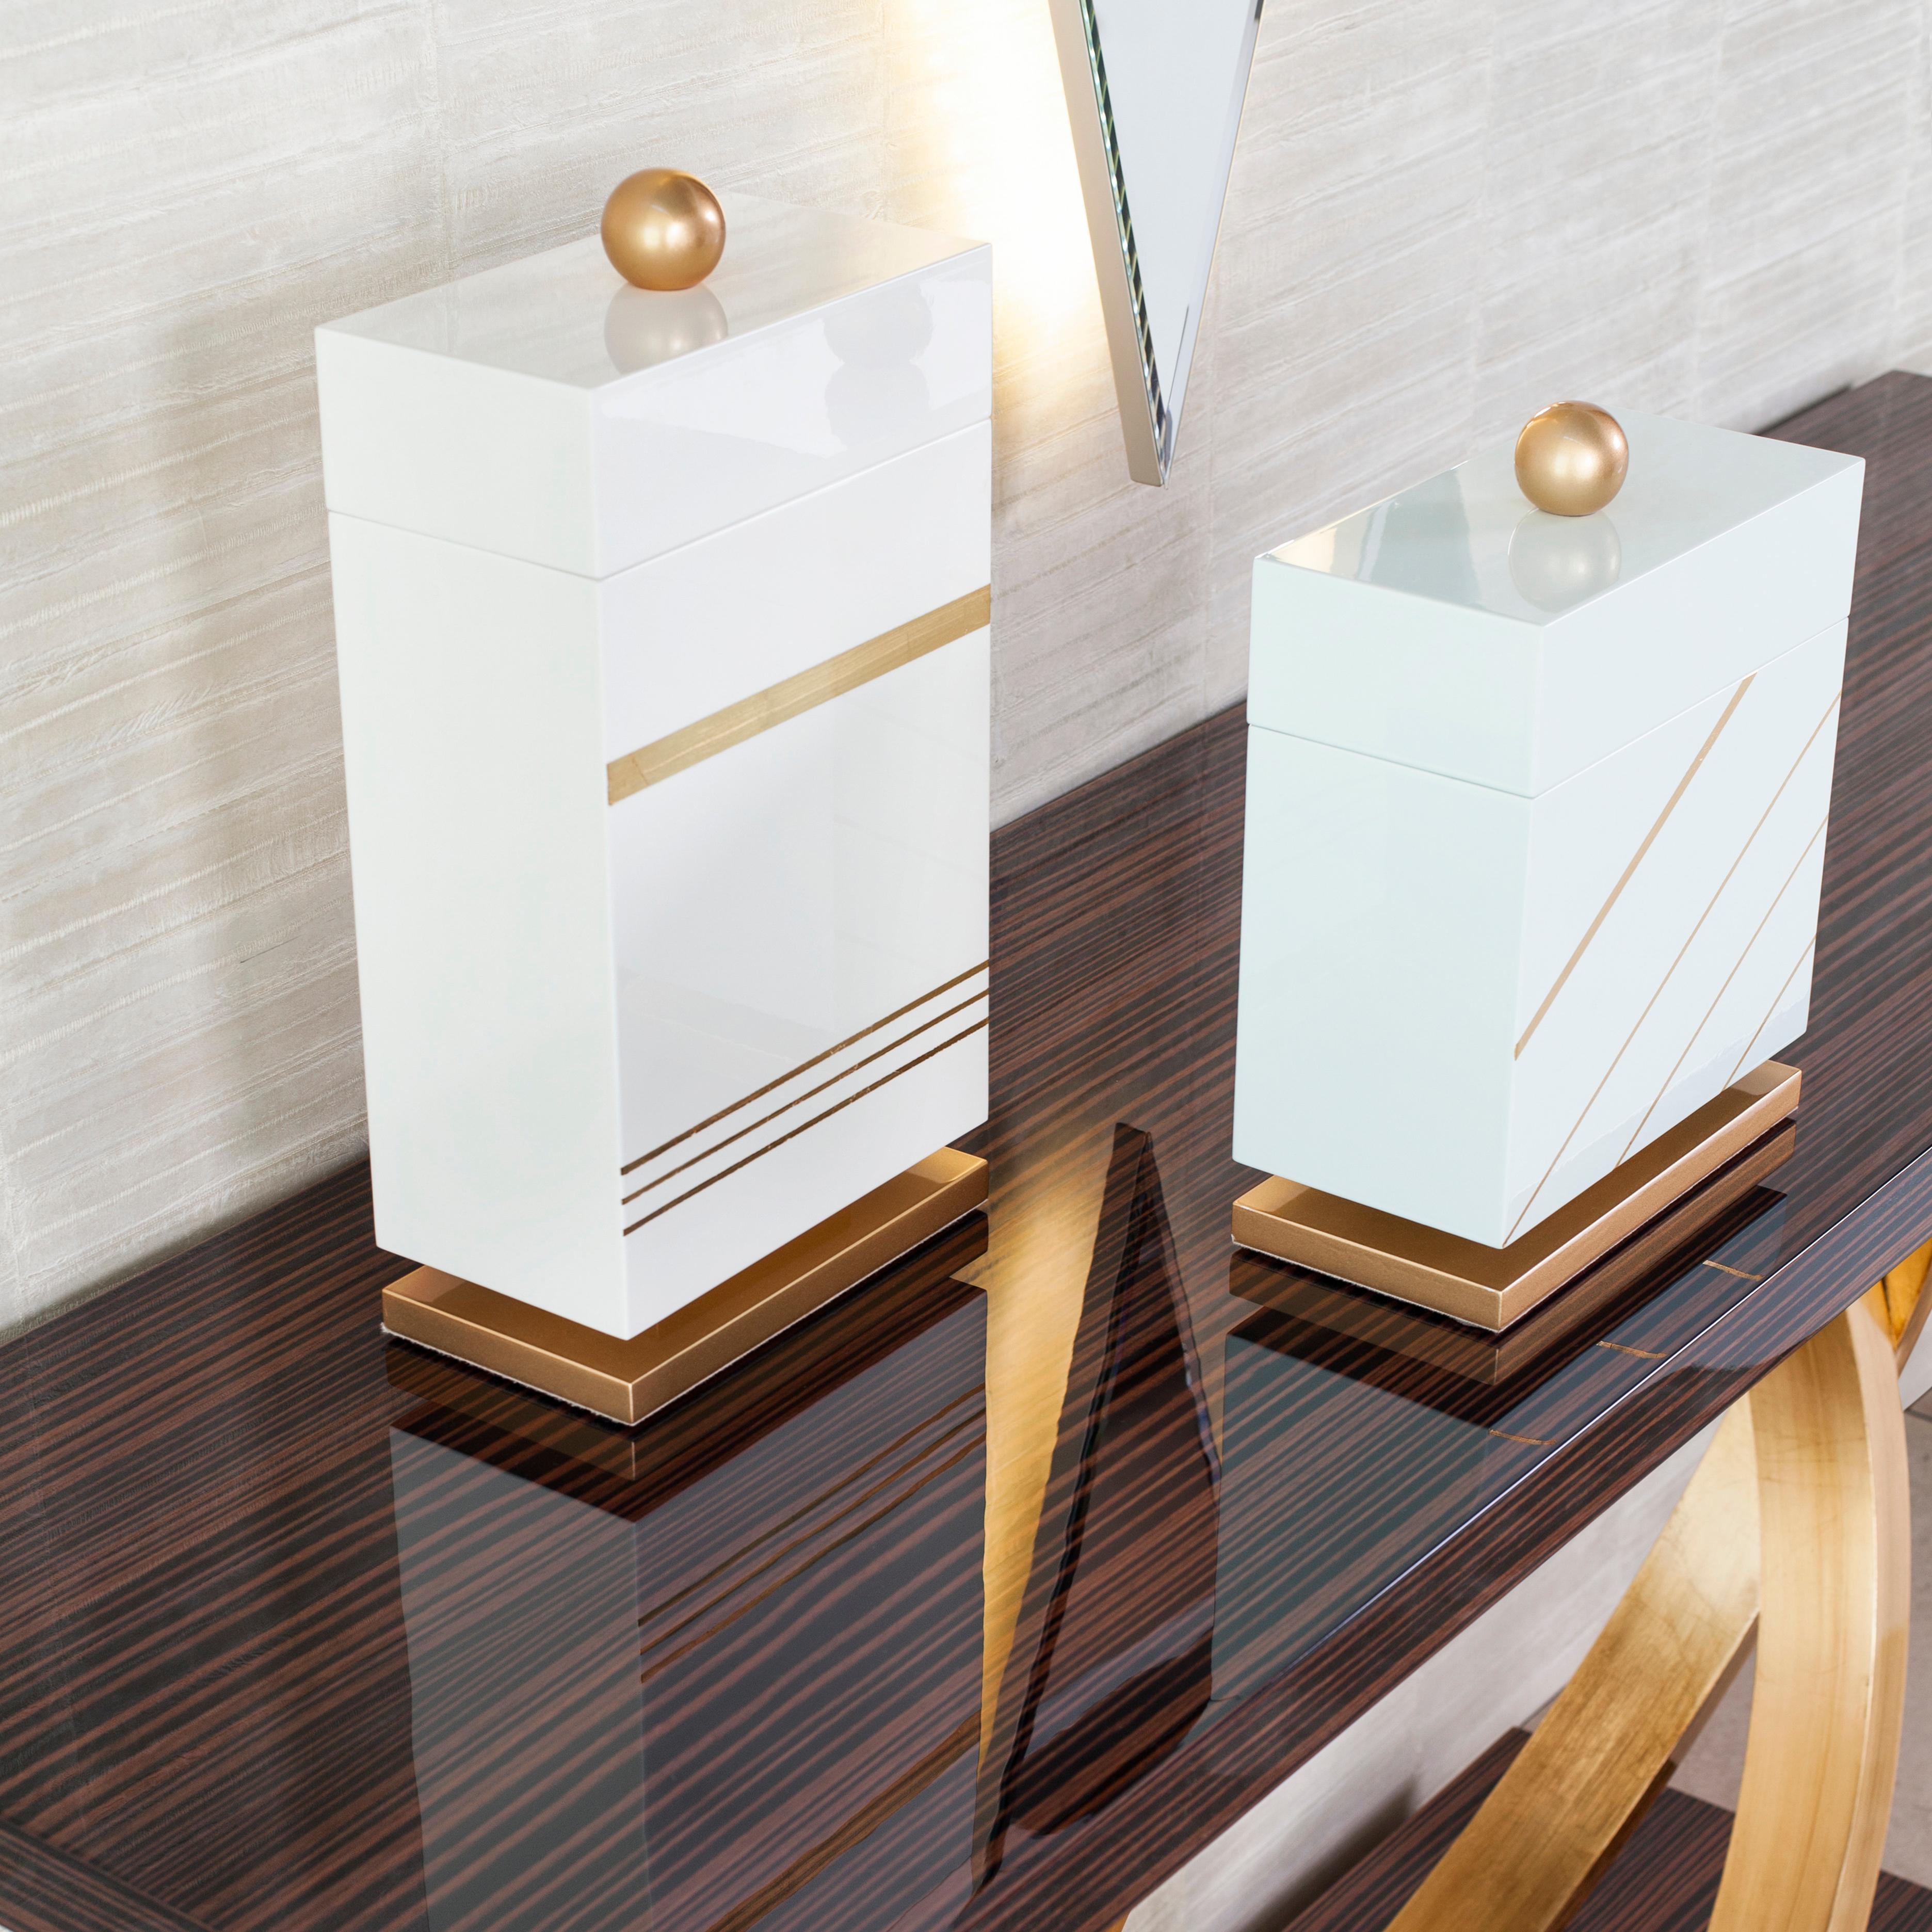 Lanzarote Boxes, Lusitanus Home Collection, Handcrafted in Portugal - Europe by Lusitanus Home.

Lanzarote box set includes two wooden boxes, perfect to be displayed together and enrich your room decor.

The white and light-blue boxes with gold leaf